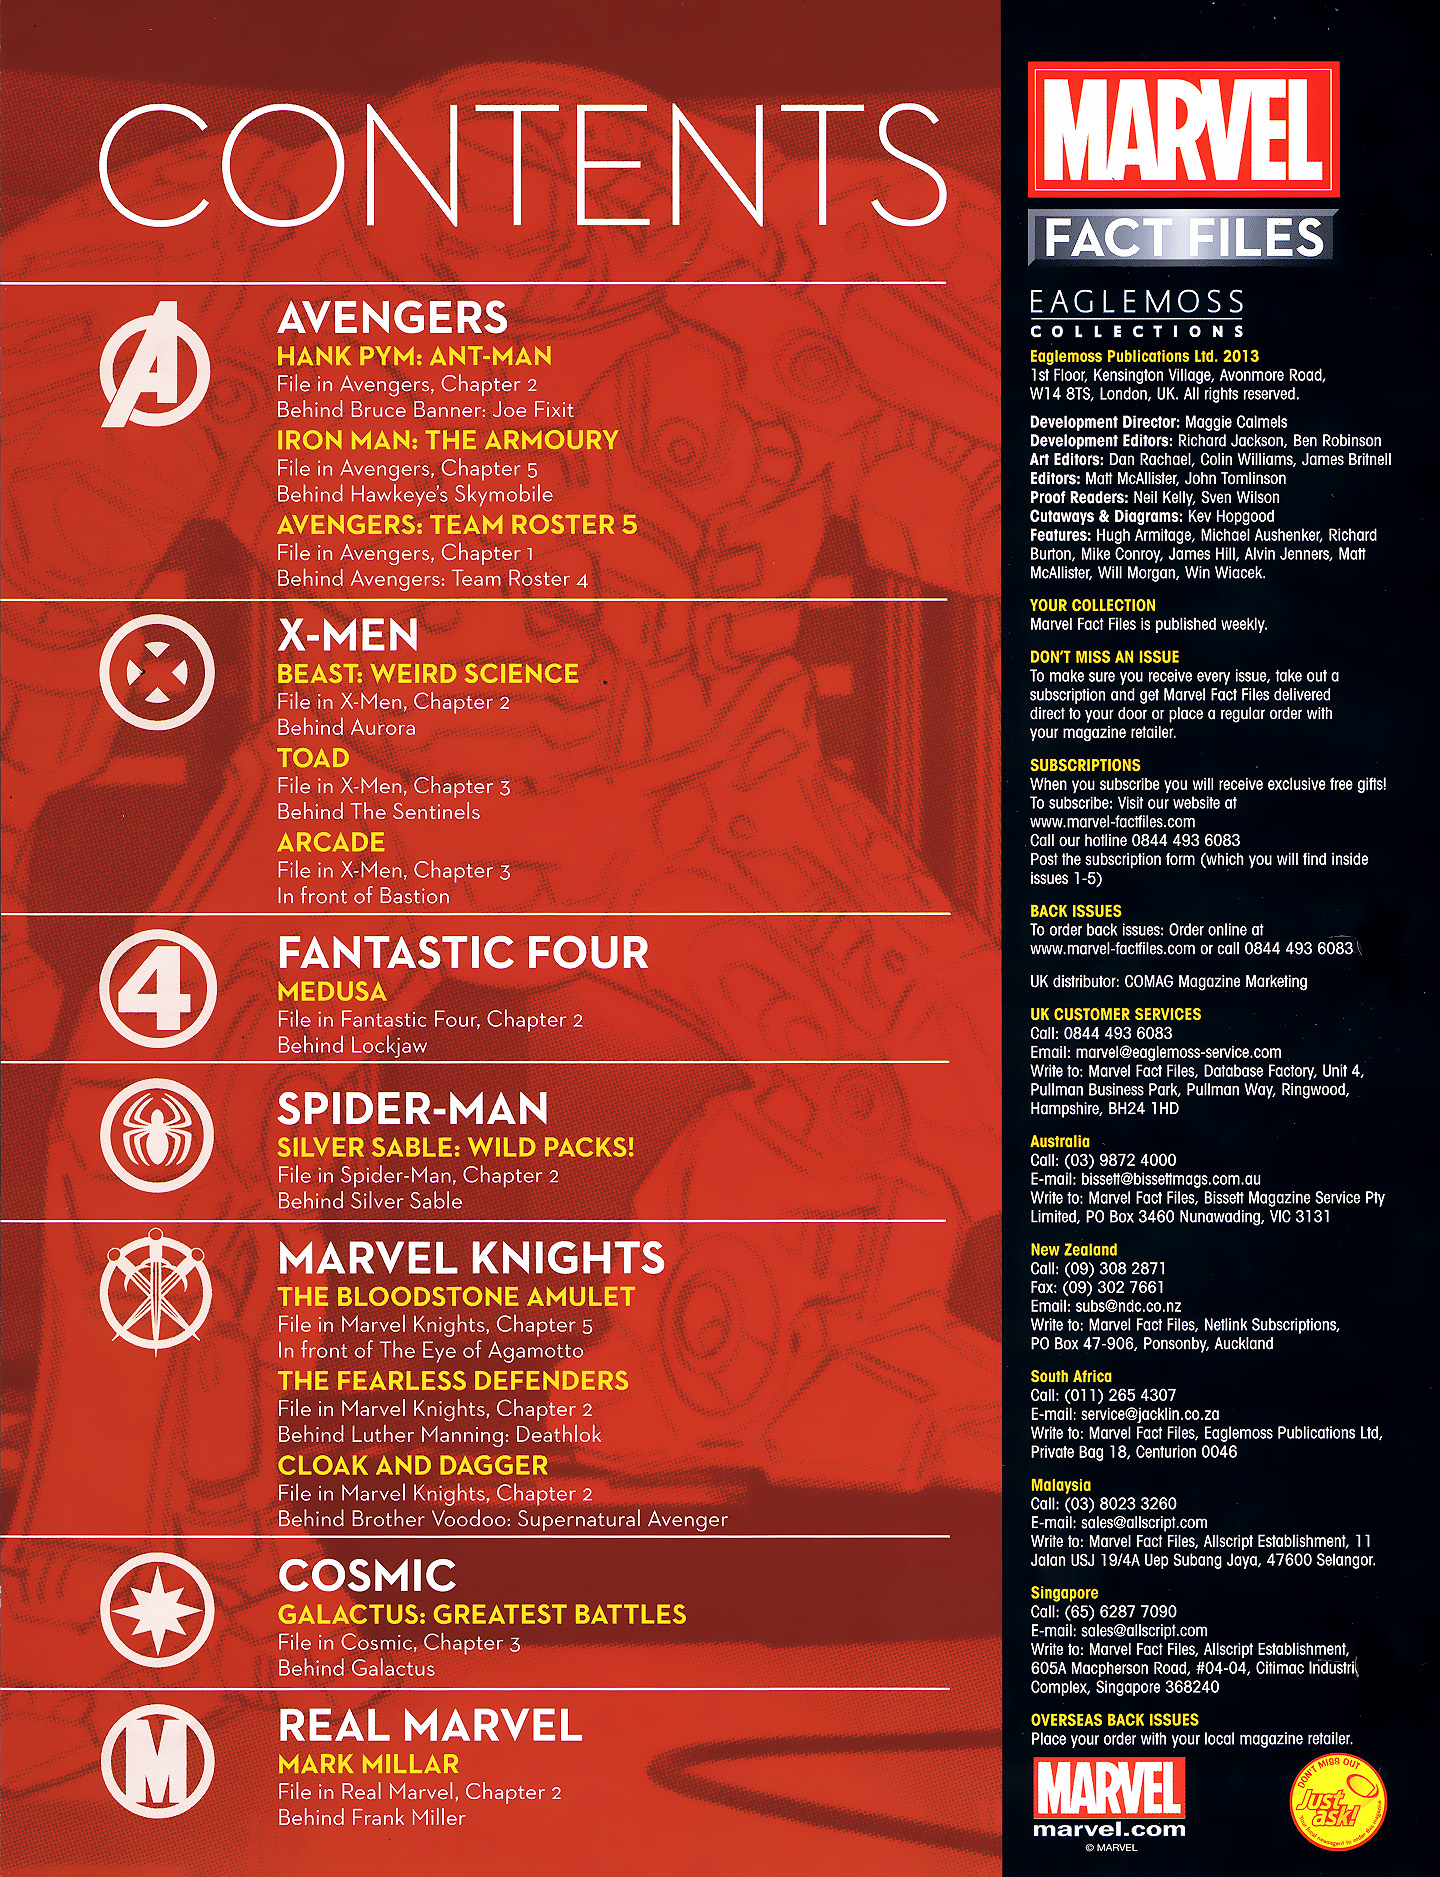 Read online Marvel Fact Files comic -  Issue #32 - 3